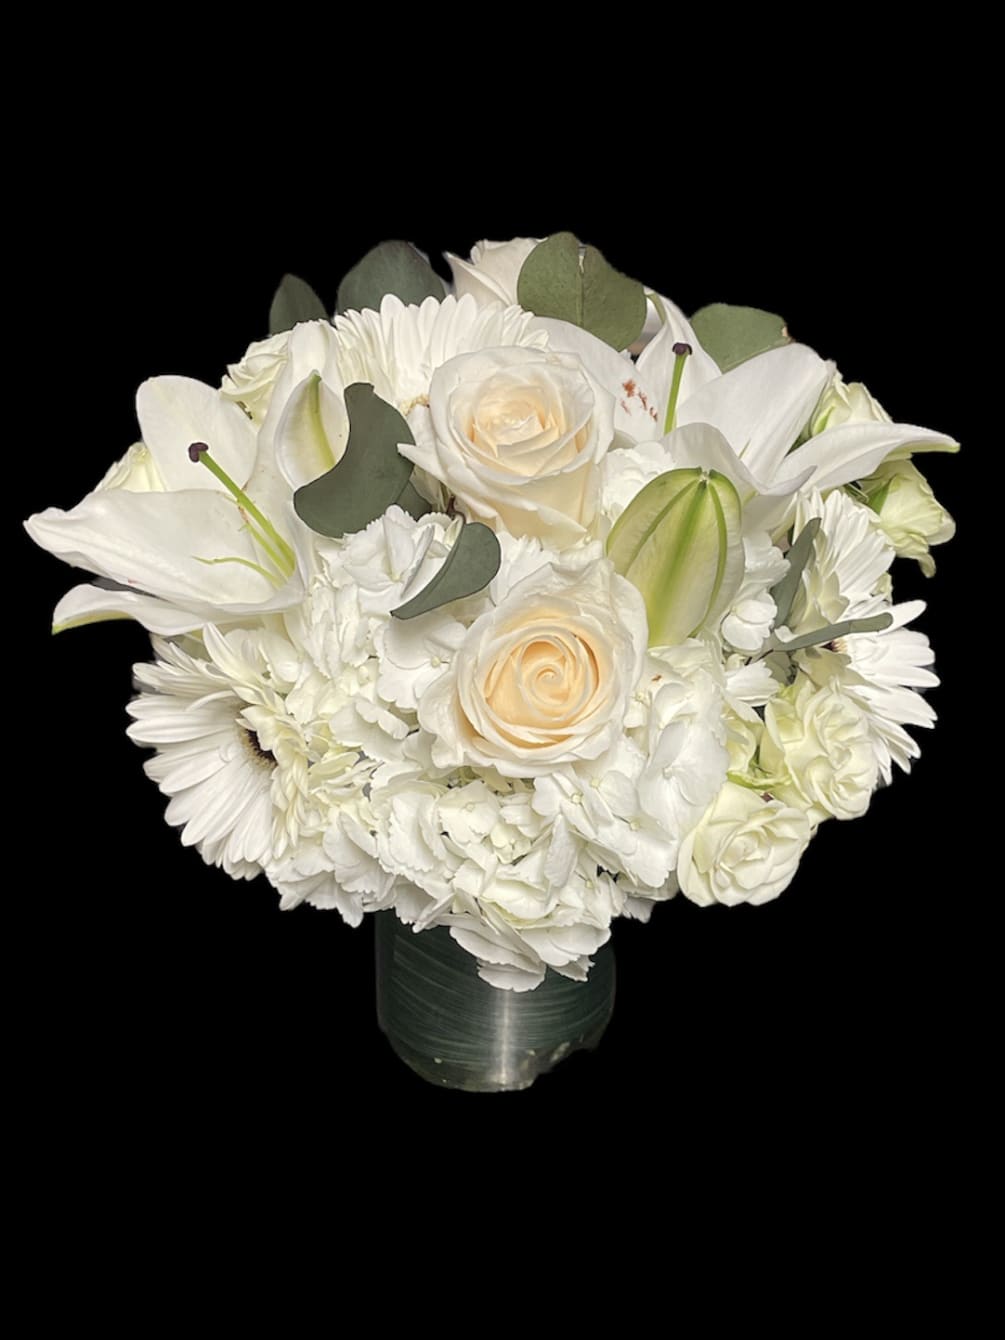 A beautiful arrangement of pureness, and perfection. Perfect for any housewarming gift